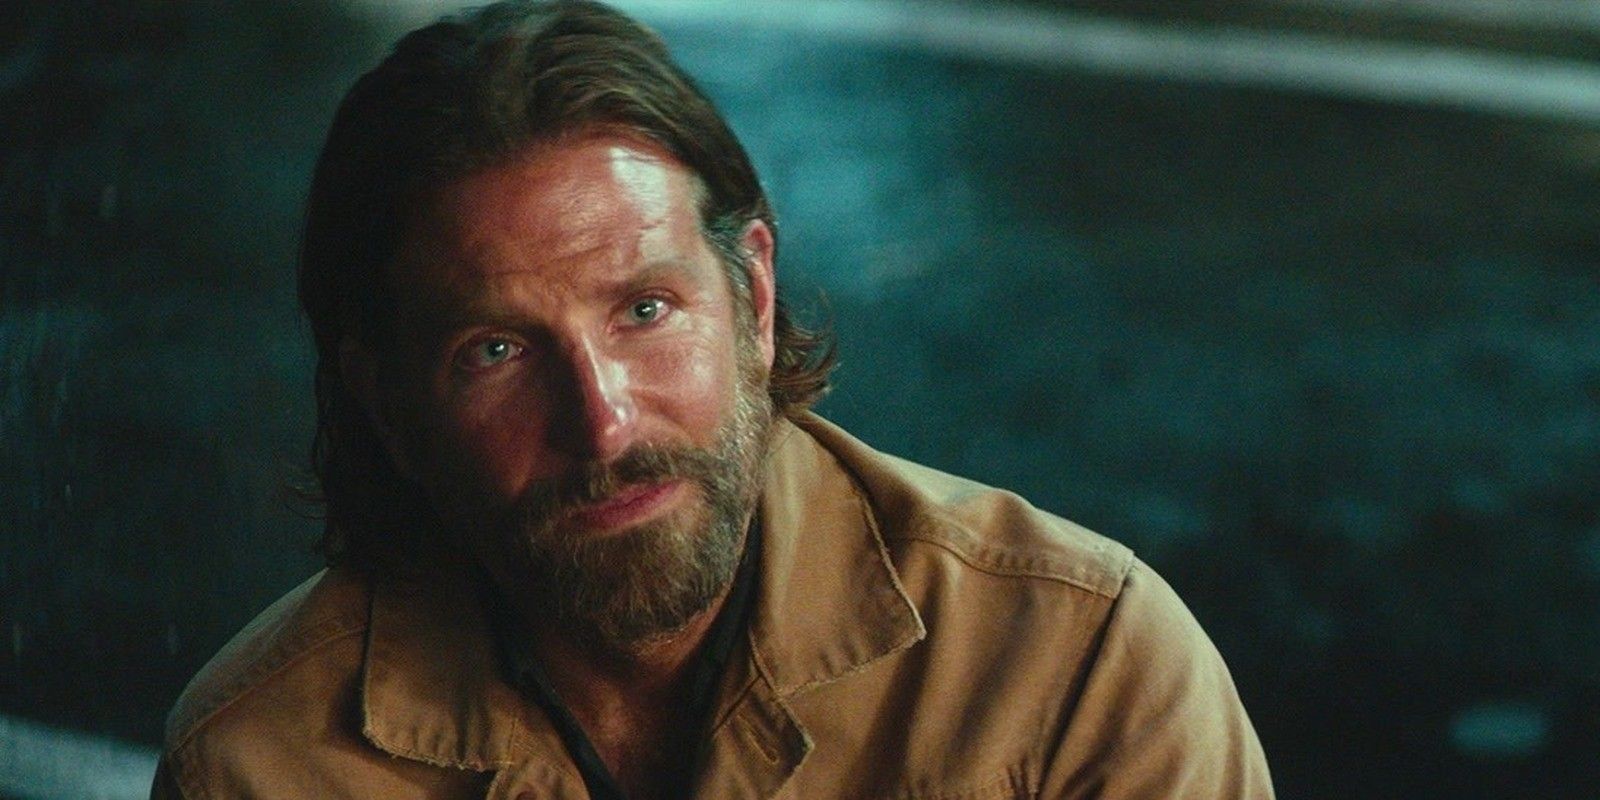 Bradley Cooper as Jackson Maine in A Star Is Born